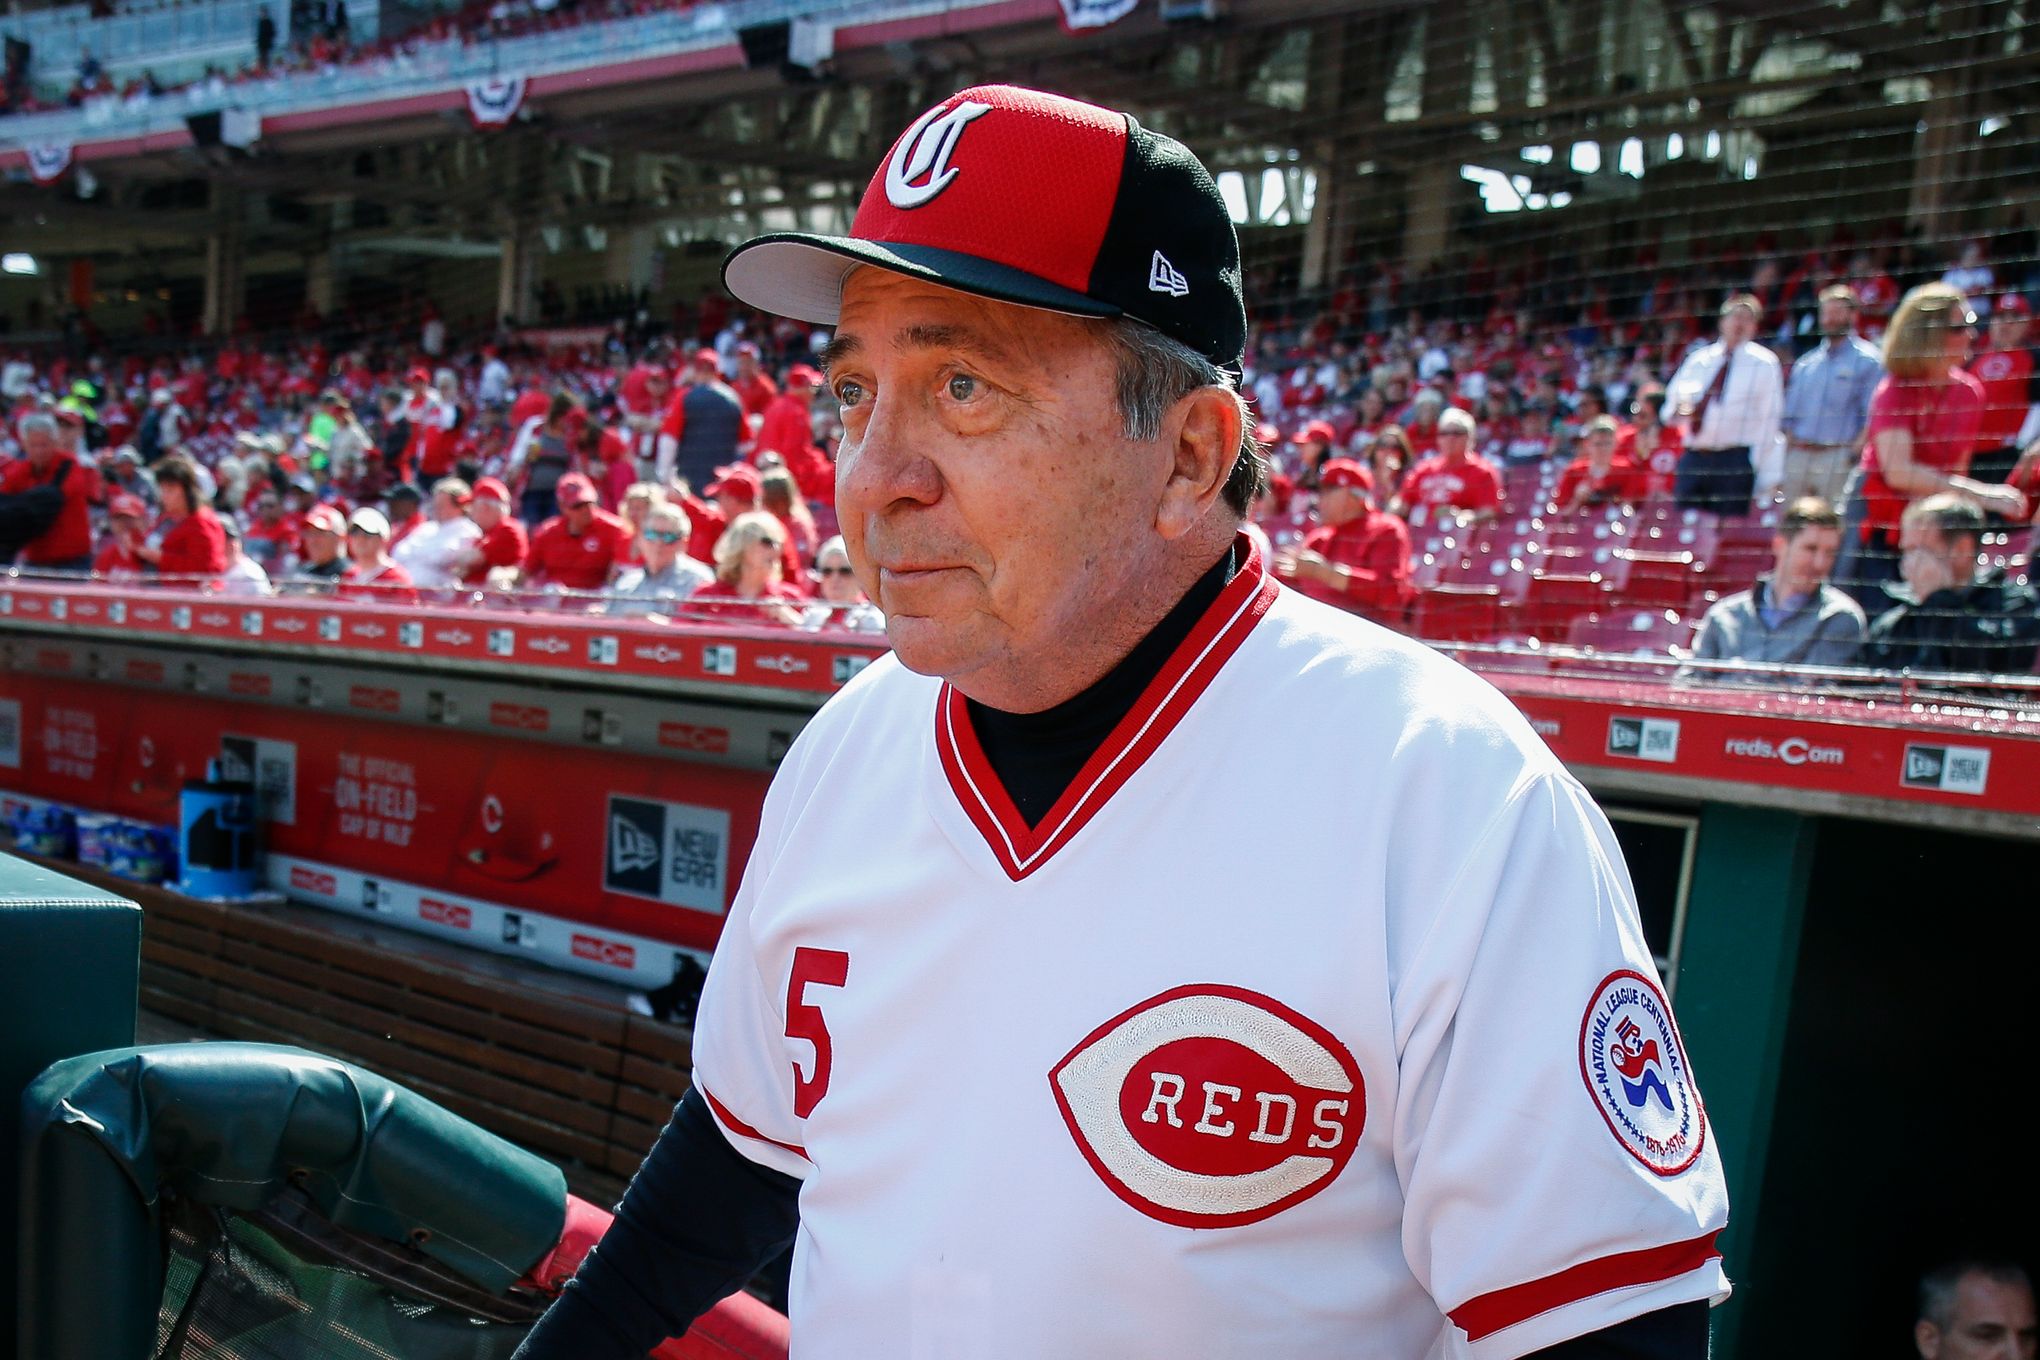 Catch it: Hall of Famer Johnny Bench to auction memorabilia – The